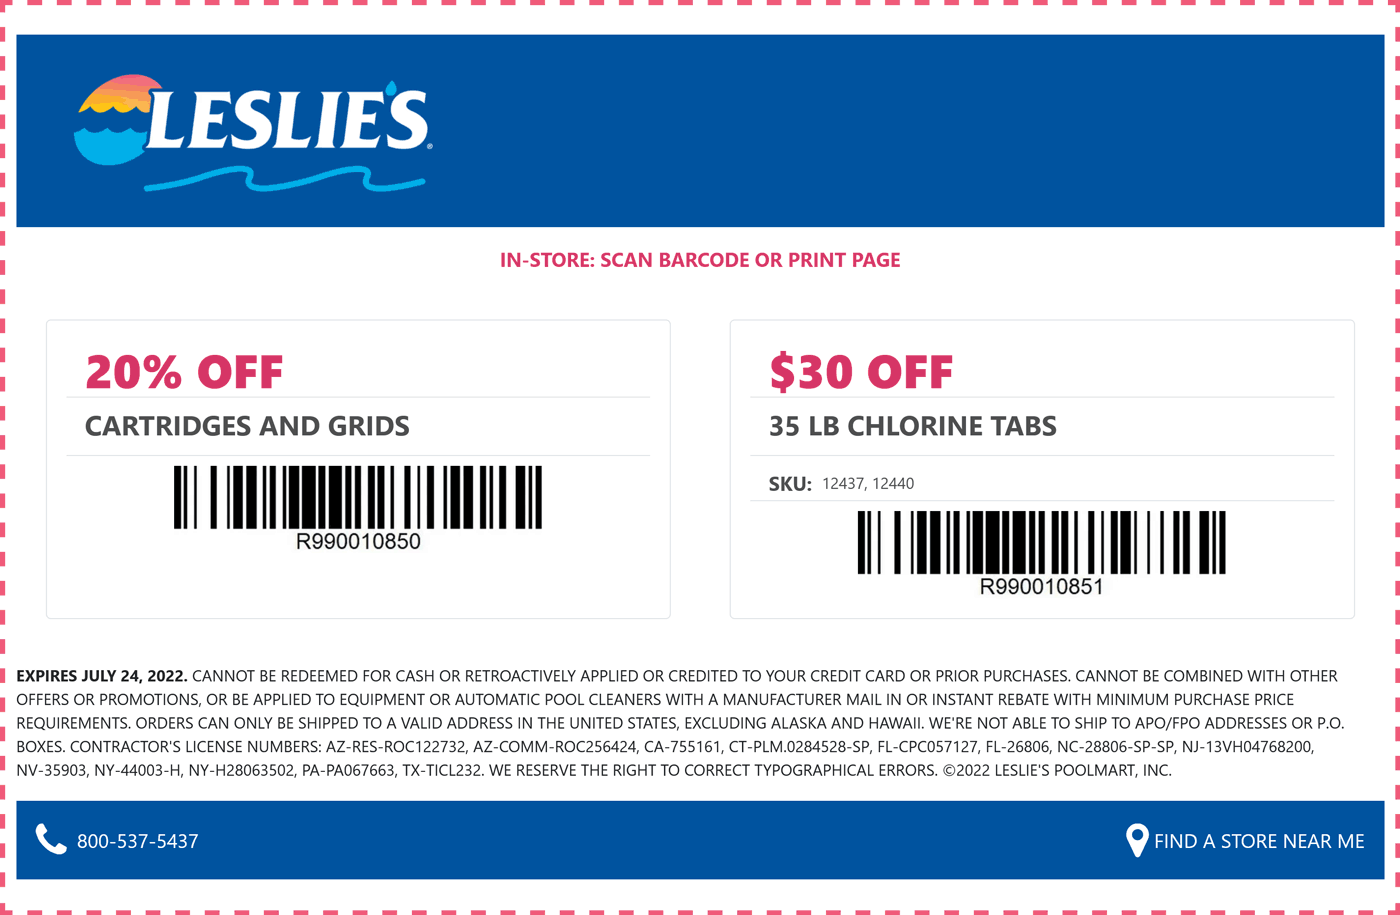 Leslies stores Coupon  $20 off filters & more today at Leslies pool #leslies 